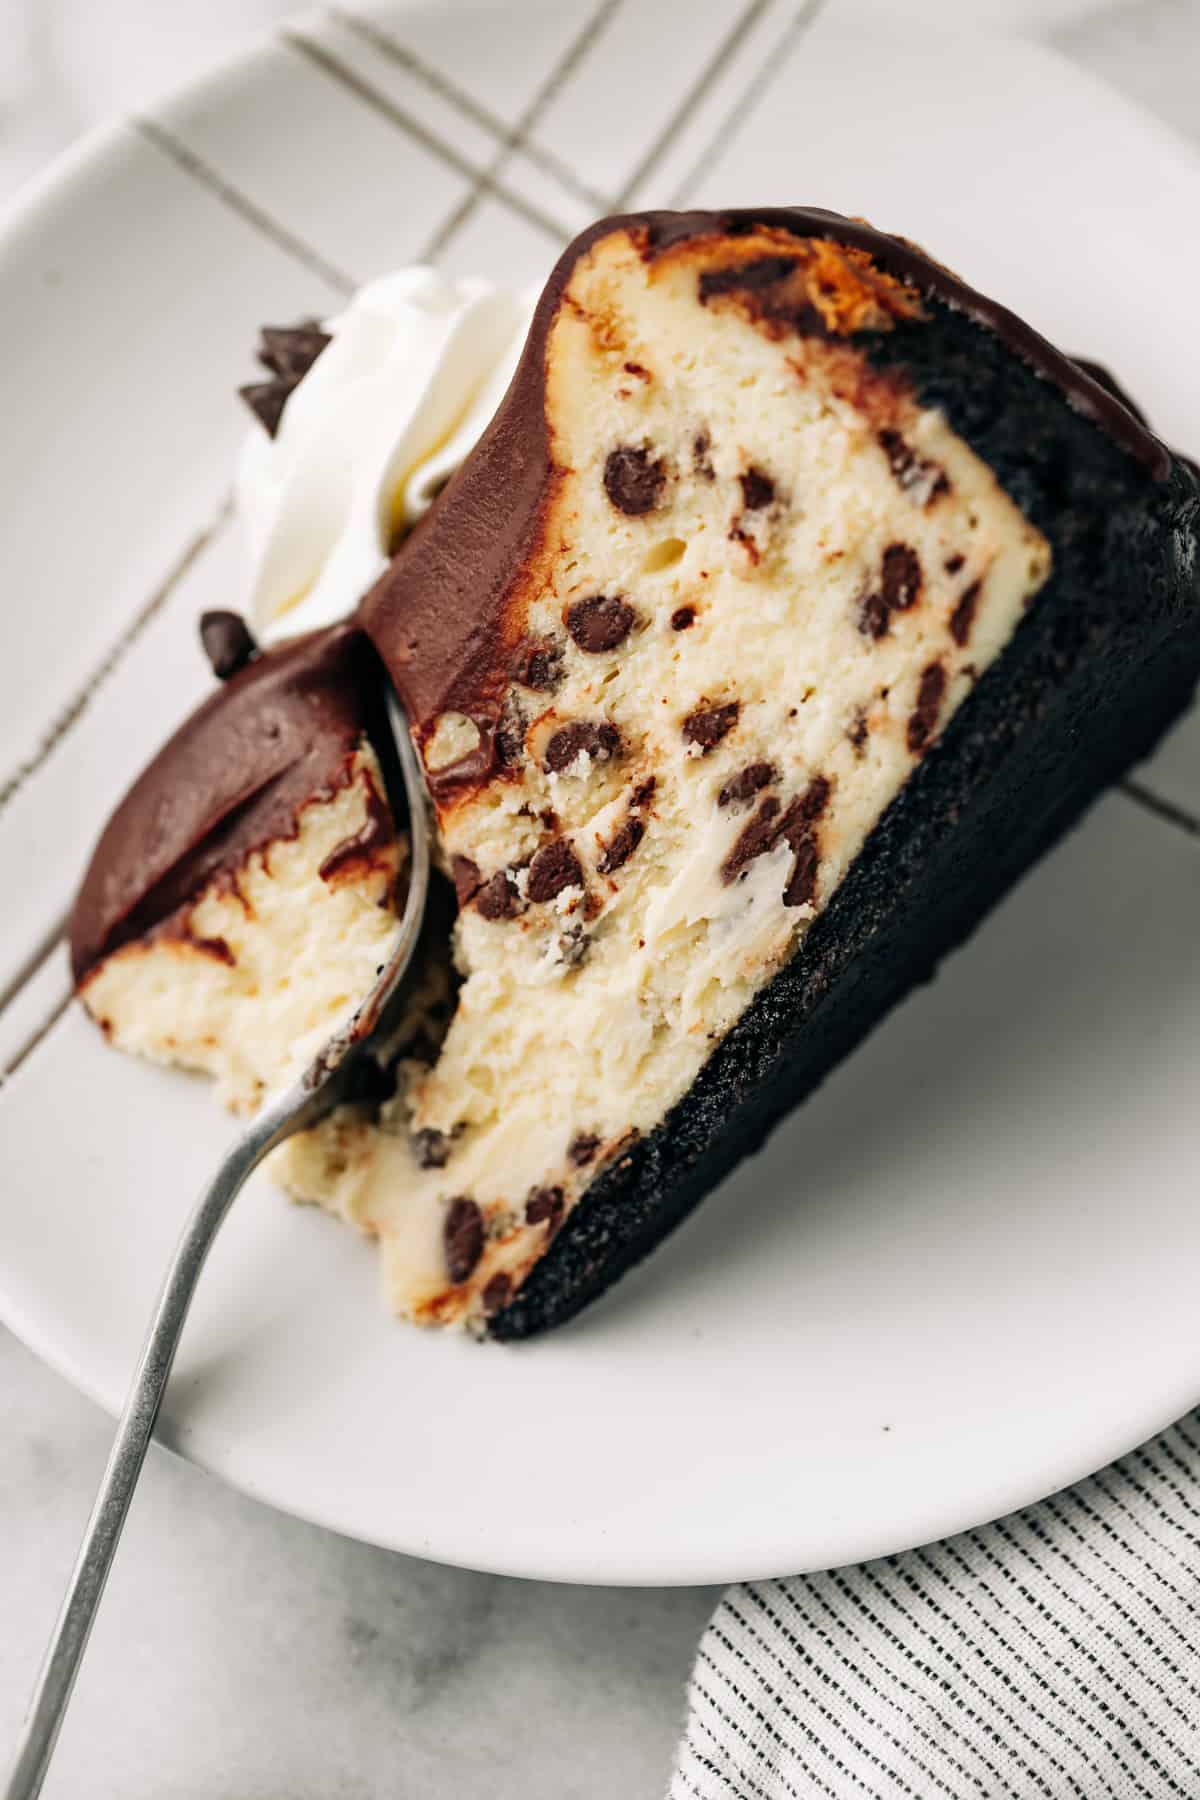 slice of chocolate chip cheesecake with ganache on a plate.